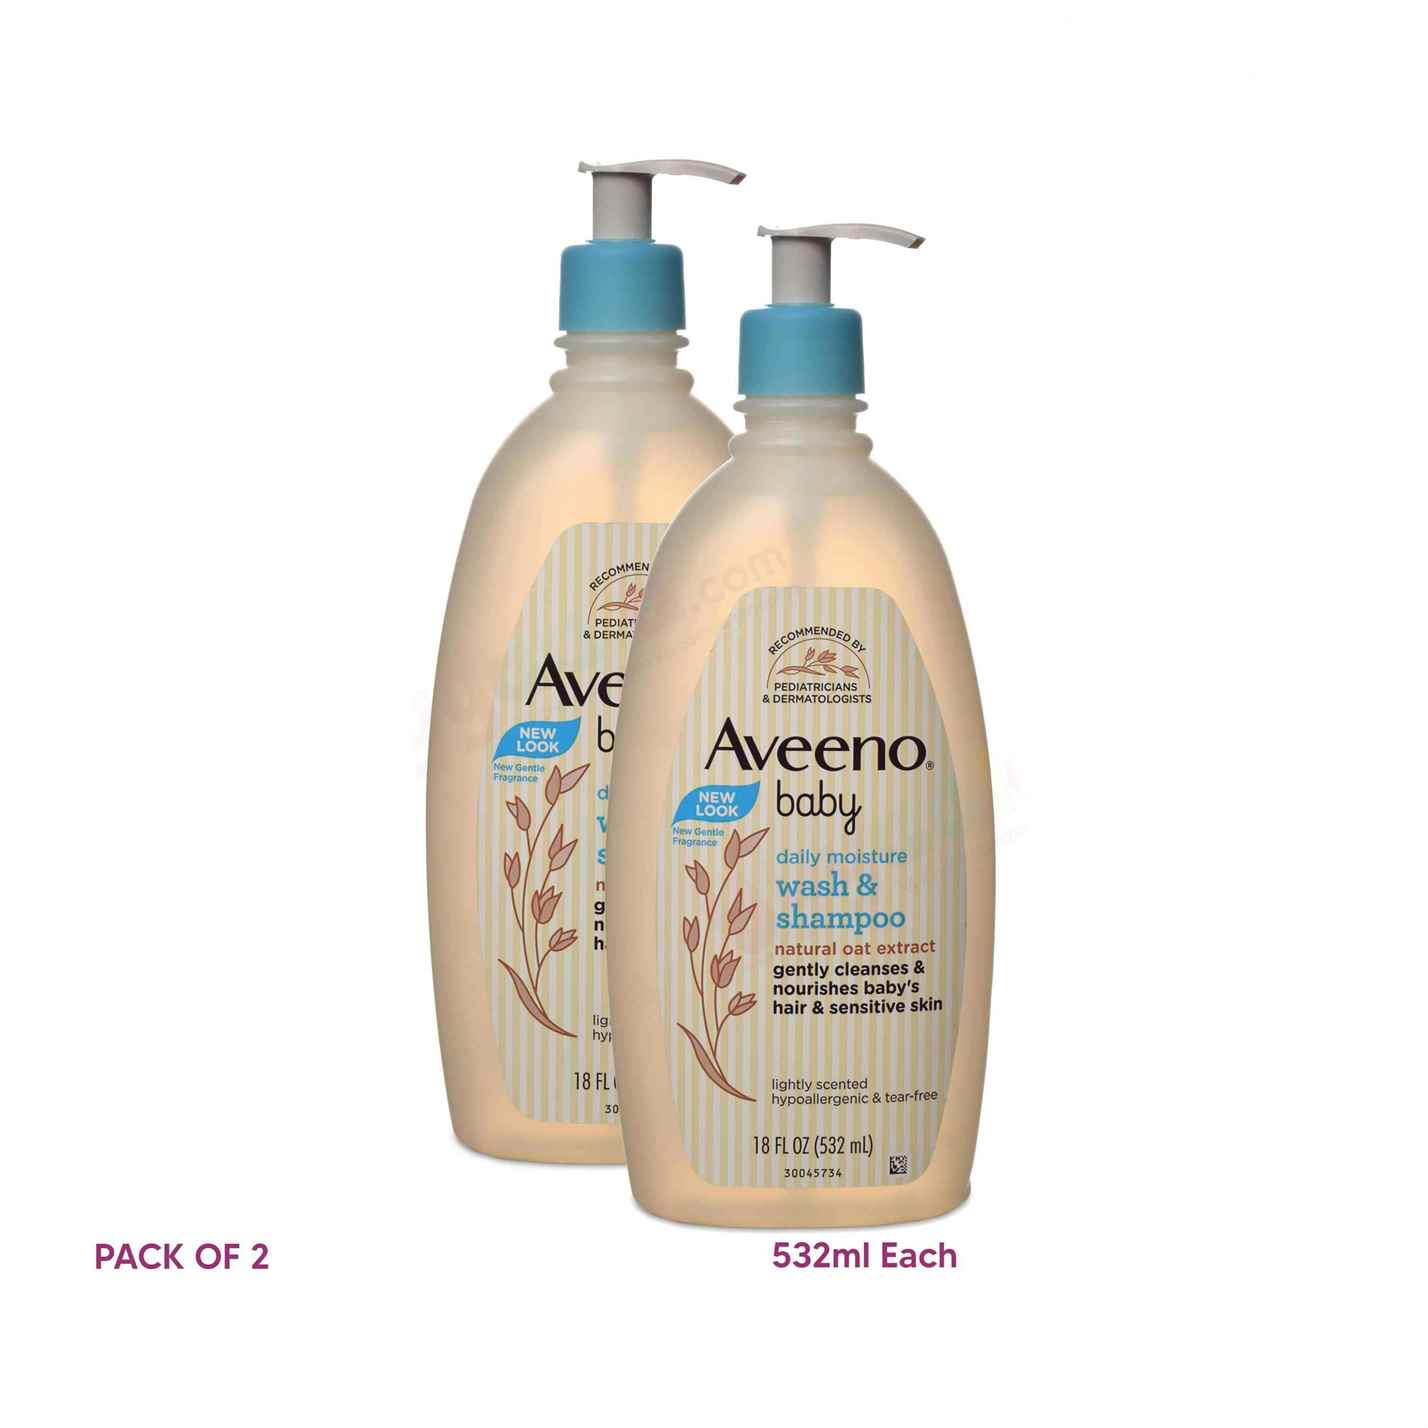 AVEENO BABY Daily moisture wash & shampoo, natural oat extract,pack of 2- 532 ml